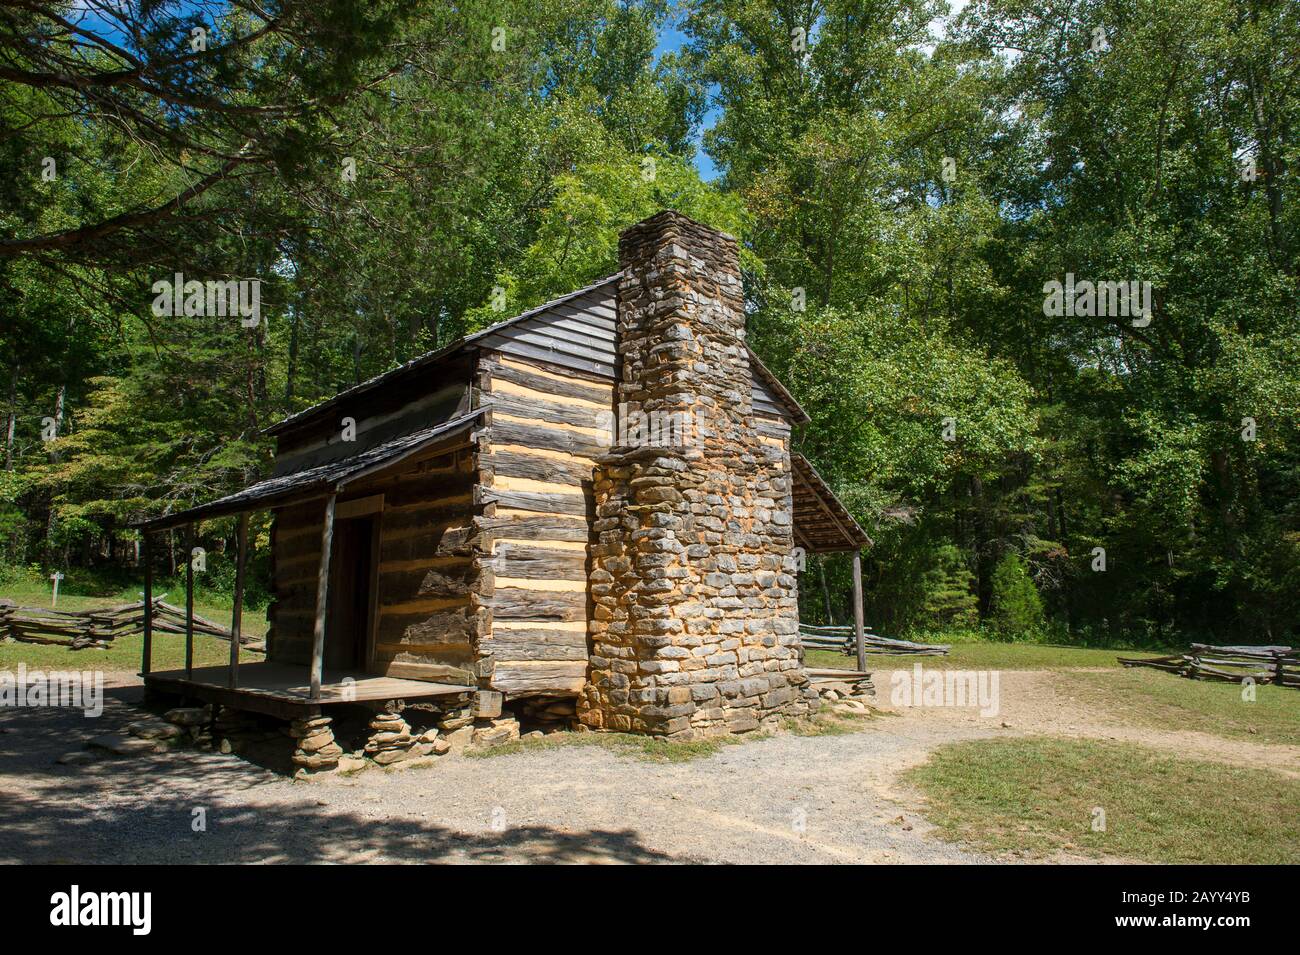 The John Oliver cabin from the 1820s in Cades Cove, Great Smoky Mountains National Park in Tennessee, USA. Stock Photo